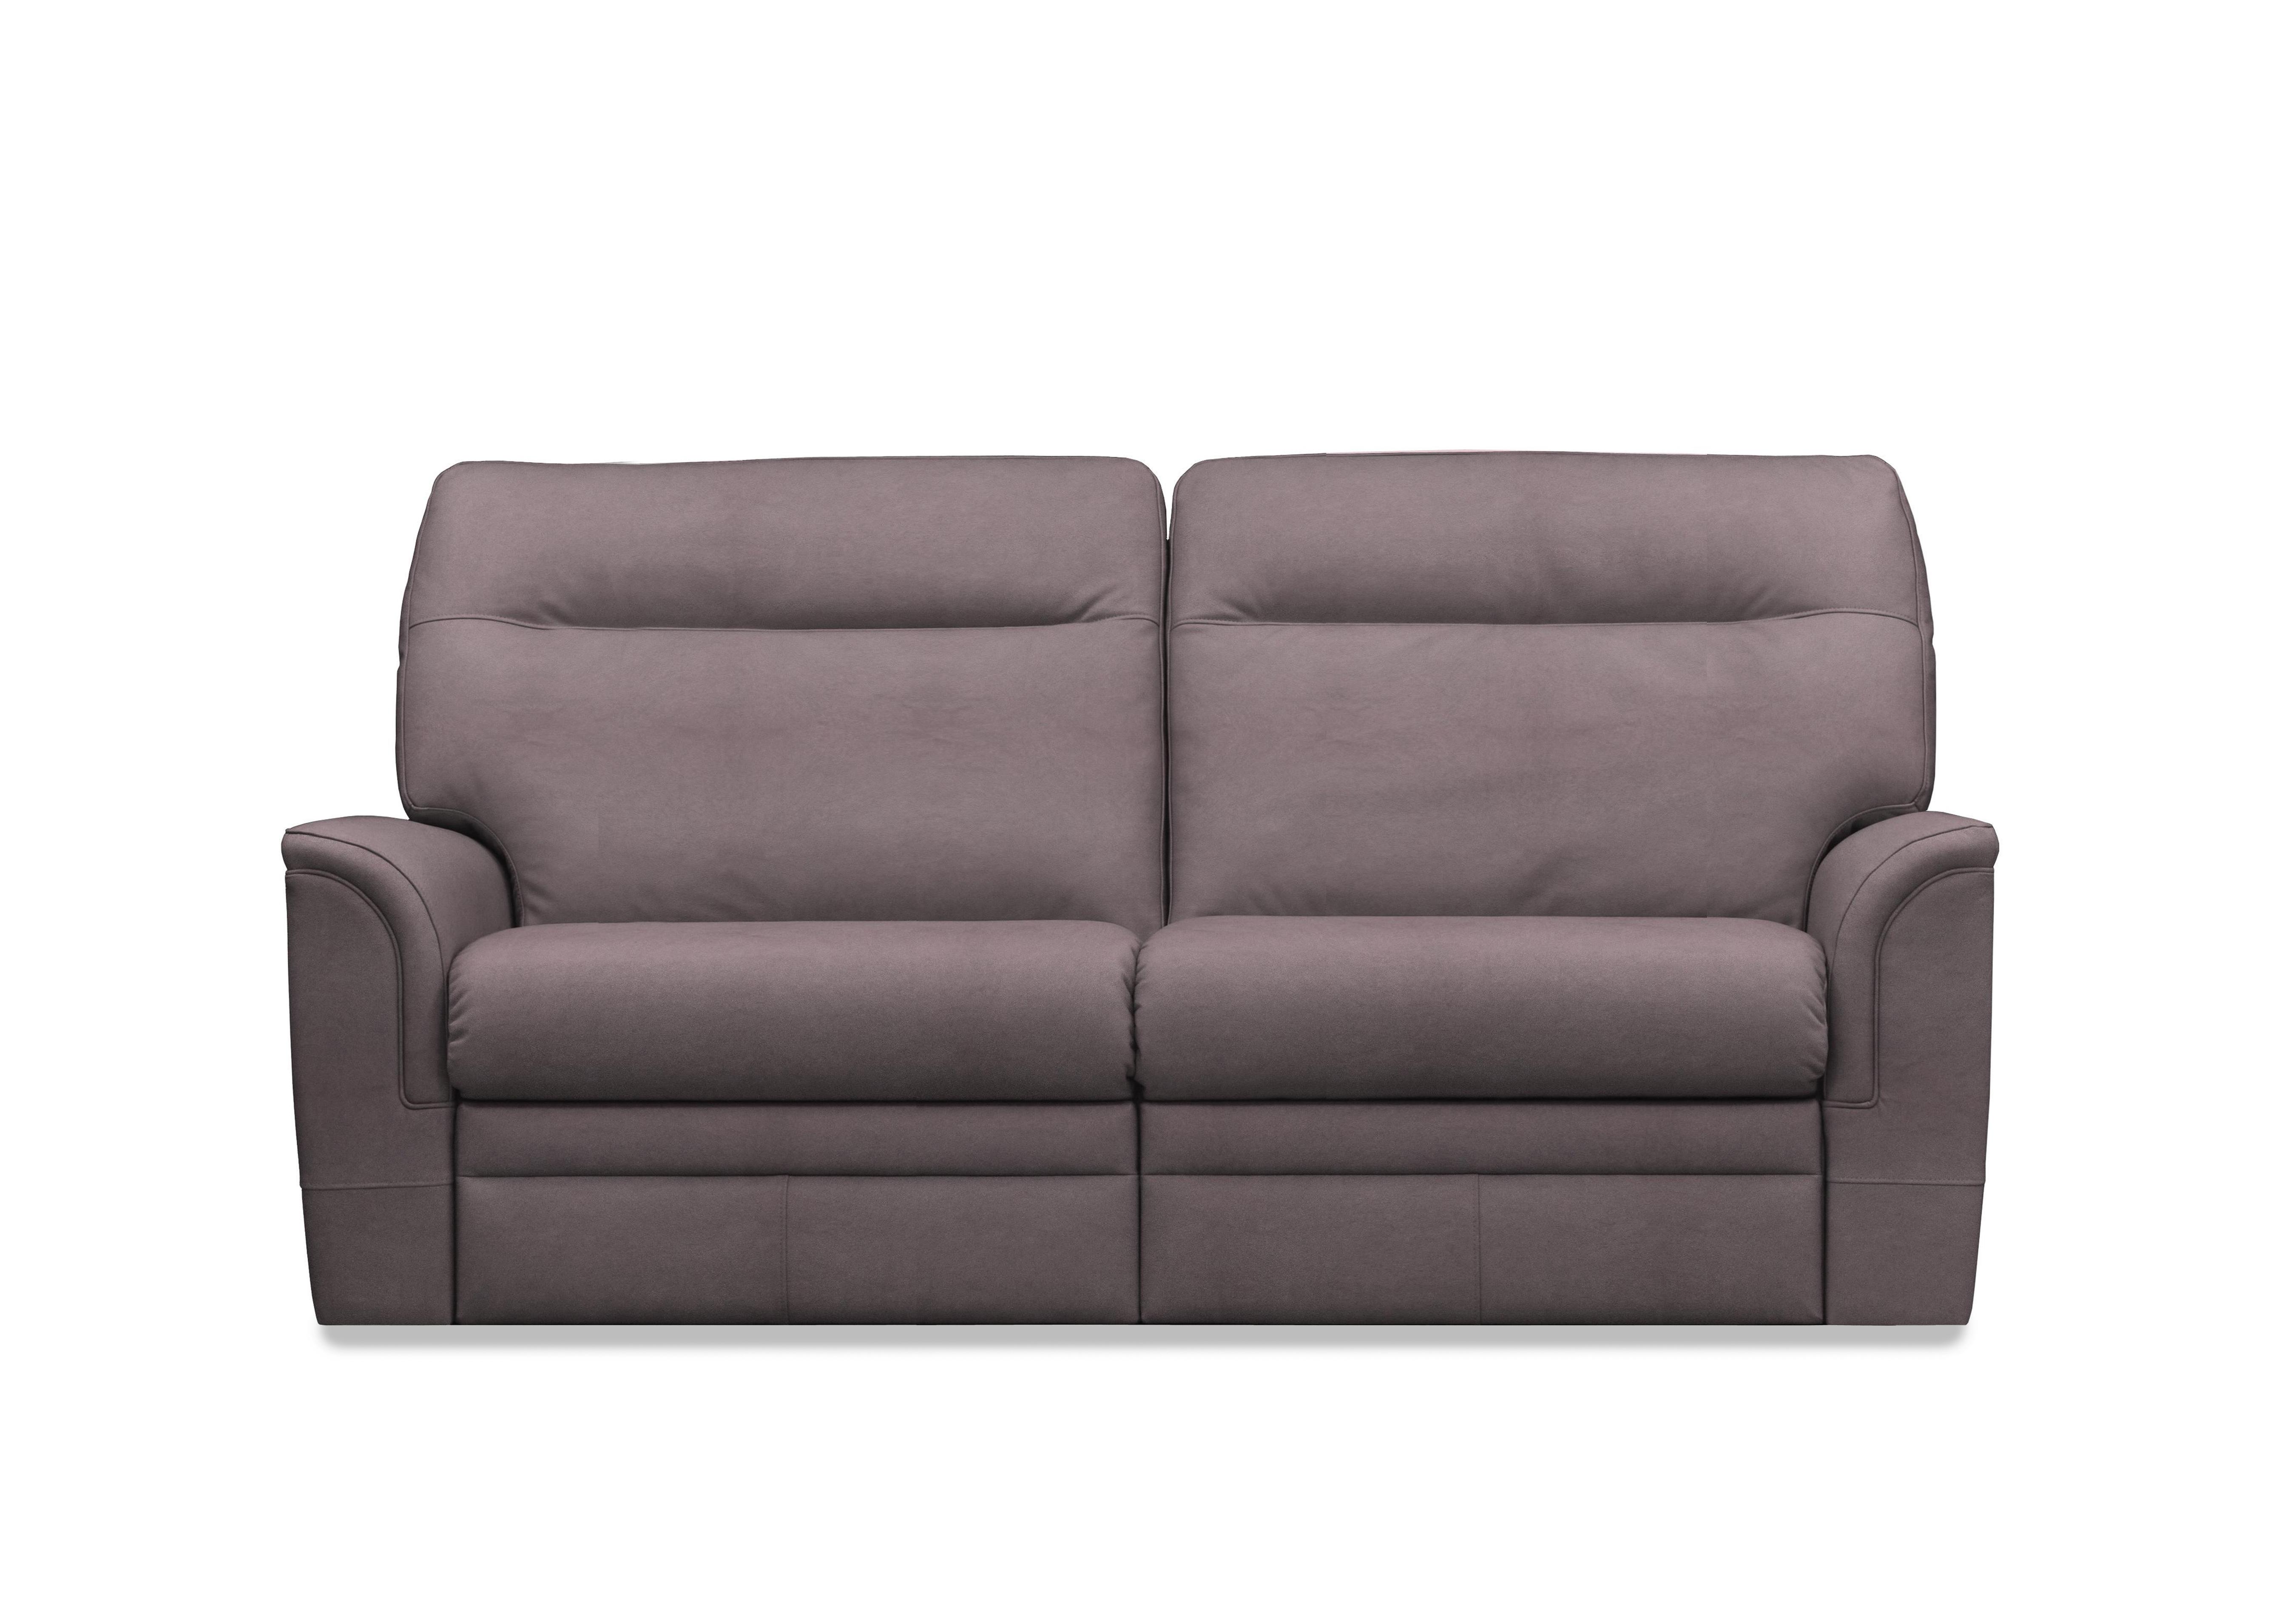 Hudson 23 Large 2 Seater Leather Sofa in Revolution Truffle 009027-0029 on Furniture Village